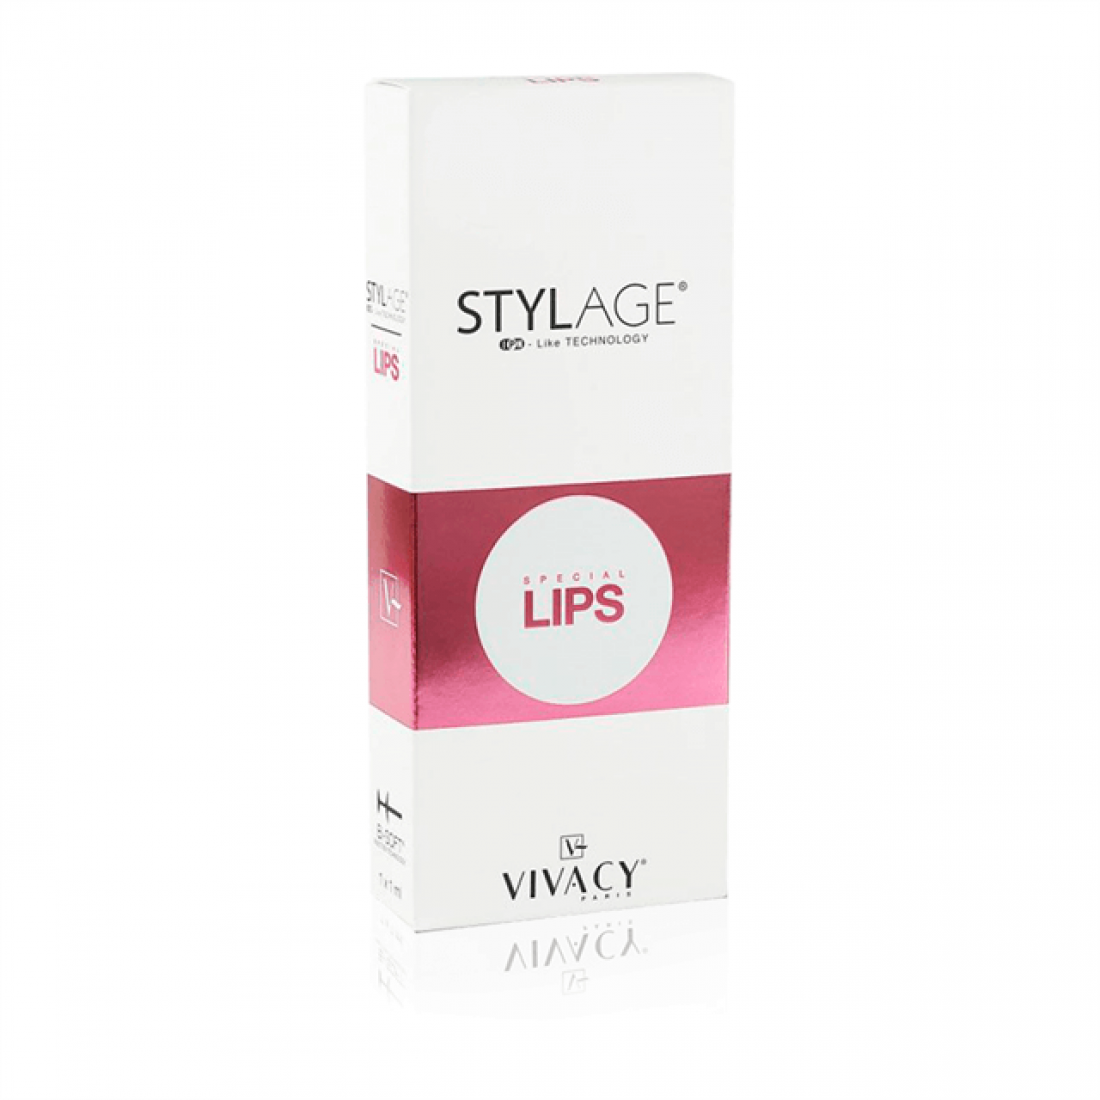 Stylage-Bi-Soft-Special-Lips-1ml-1100x1100.png